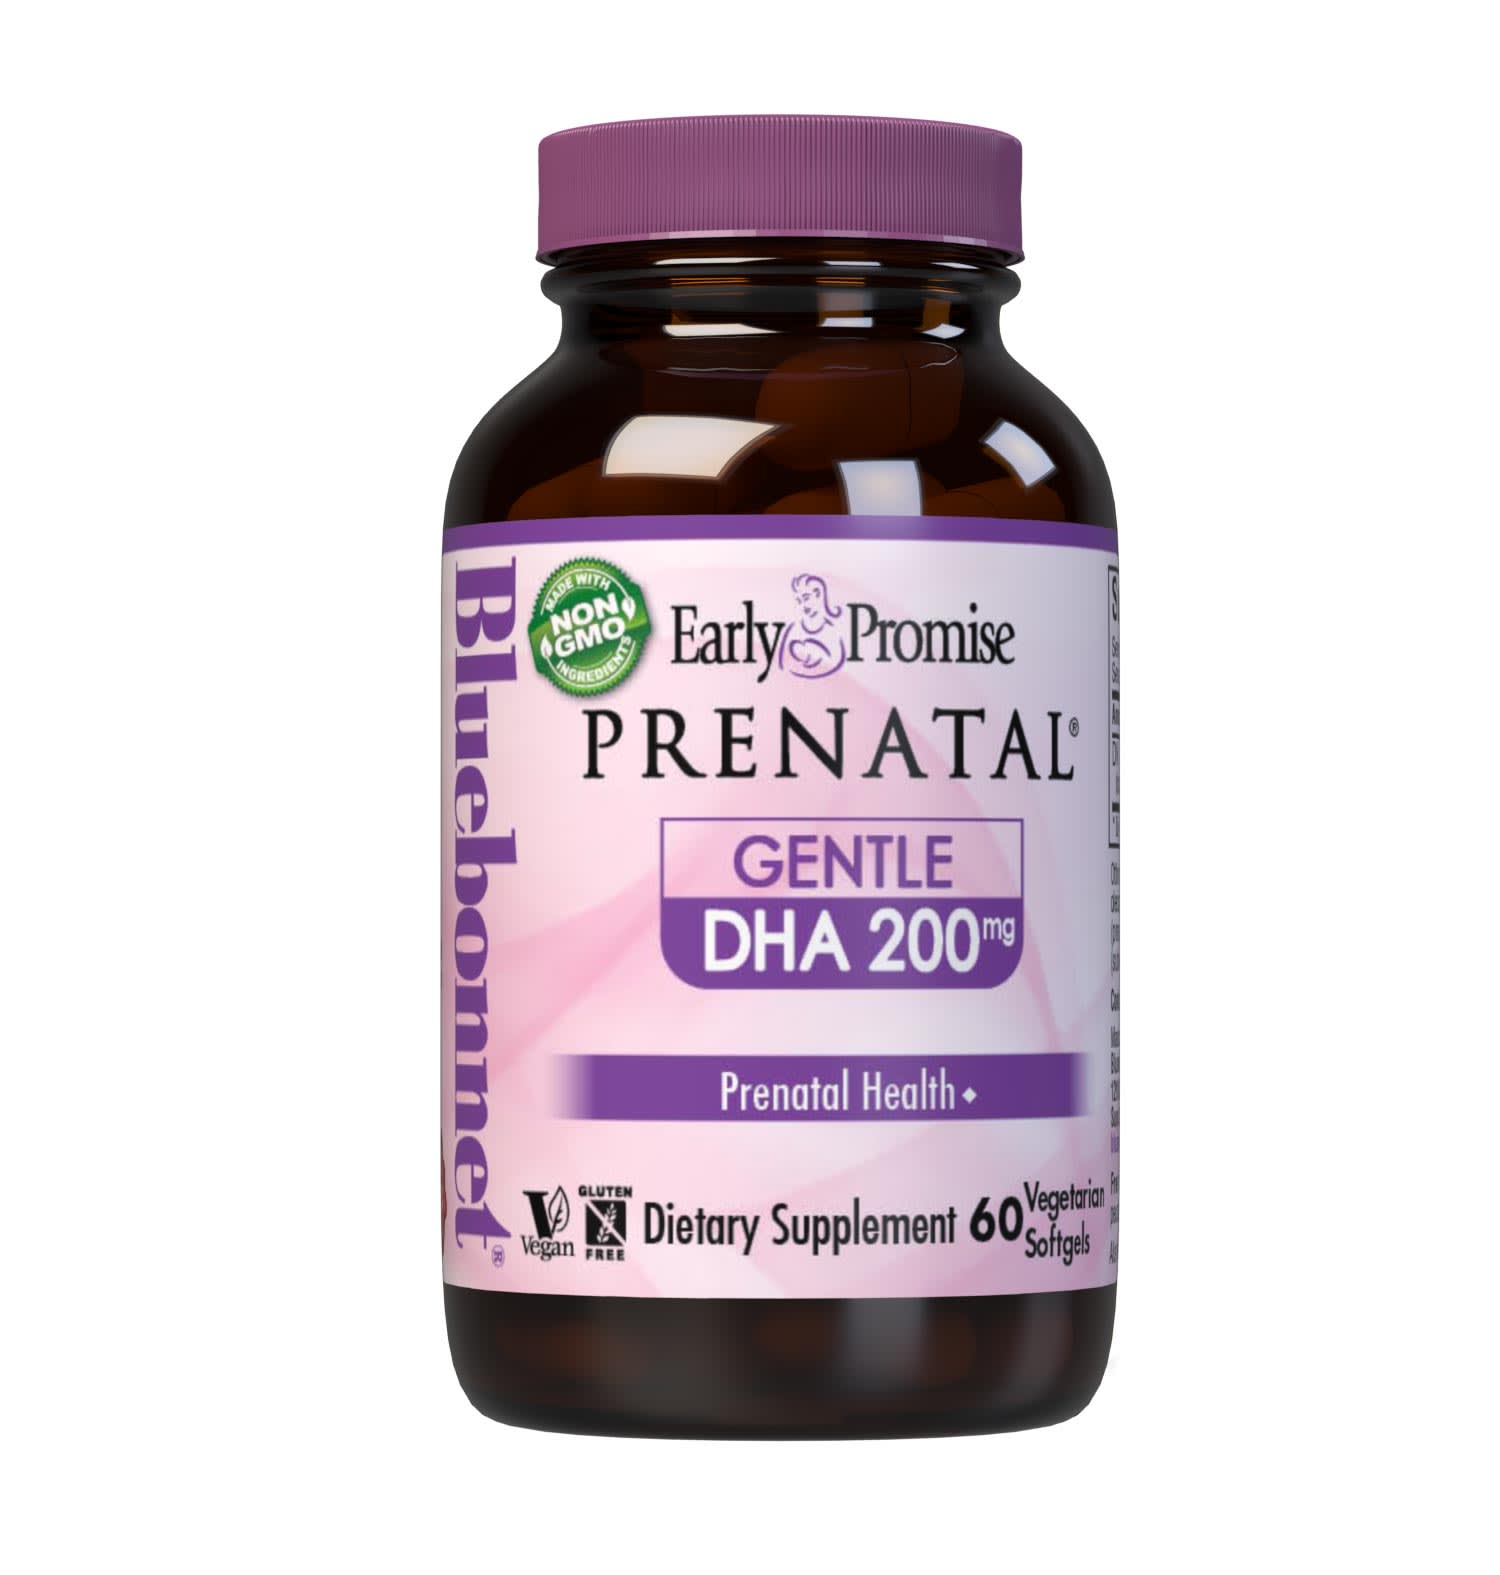 Early Promise Prenatal Gentle DHA 200 mg 60 Vegetarian Softgels are formulated with life'sDHA, a vegetable-based docosahexaenoic acid (DHA) in a triglyceride form derived from marine algae. Life'sDHA™ is the perfect complement to any woman's diet during pregnancy and/or lactation. #size_60 count